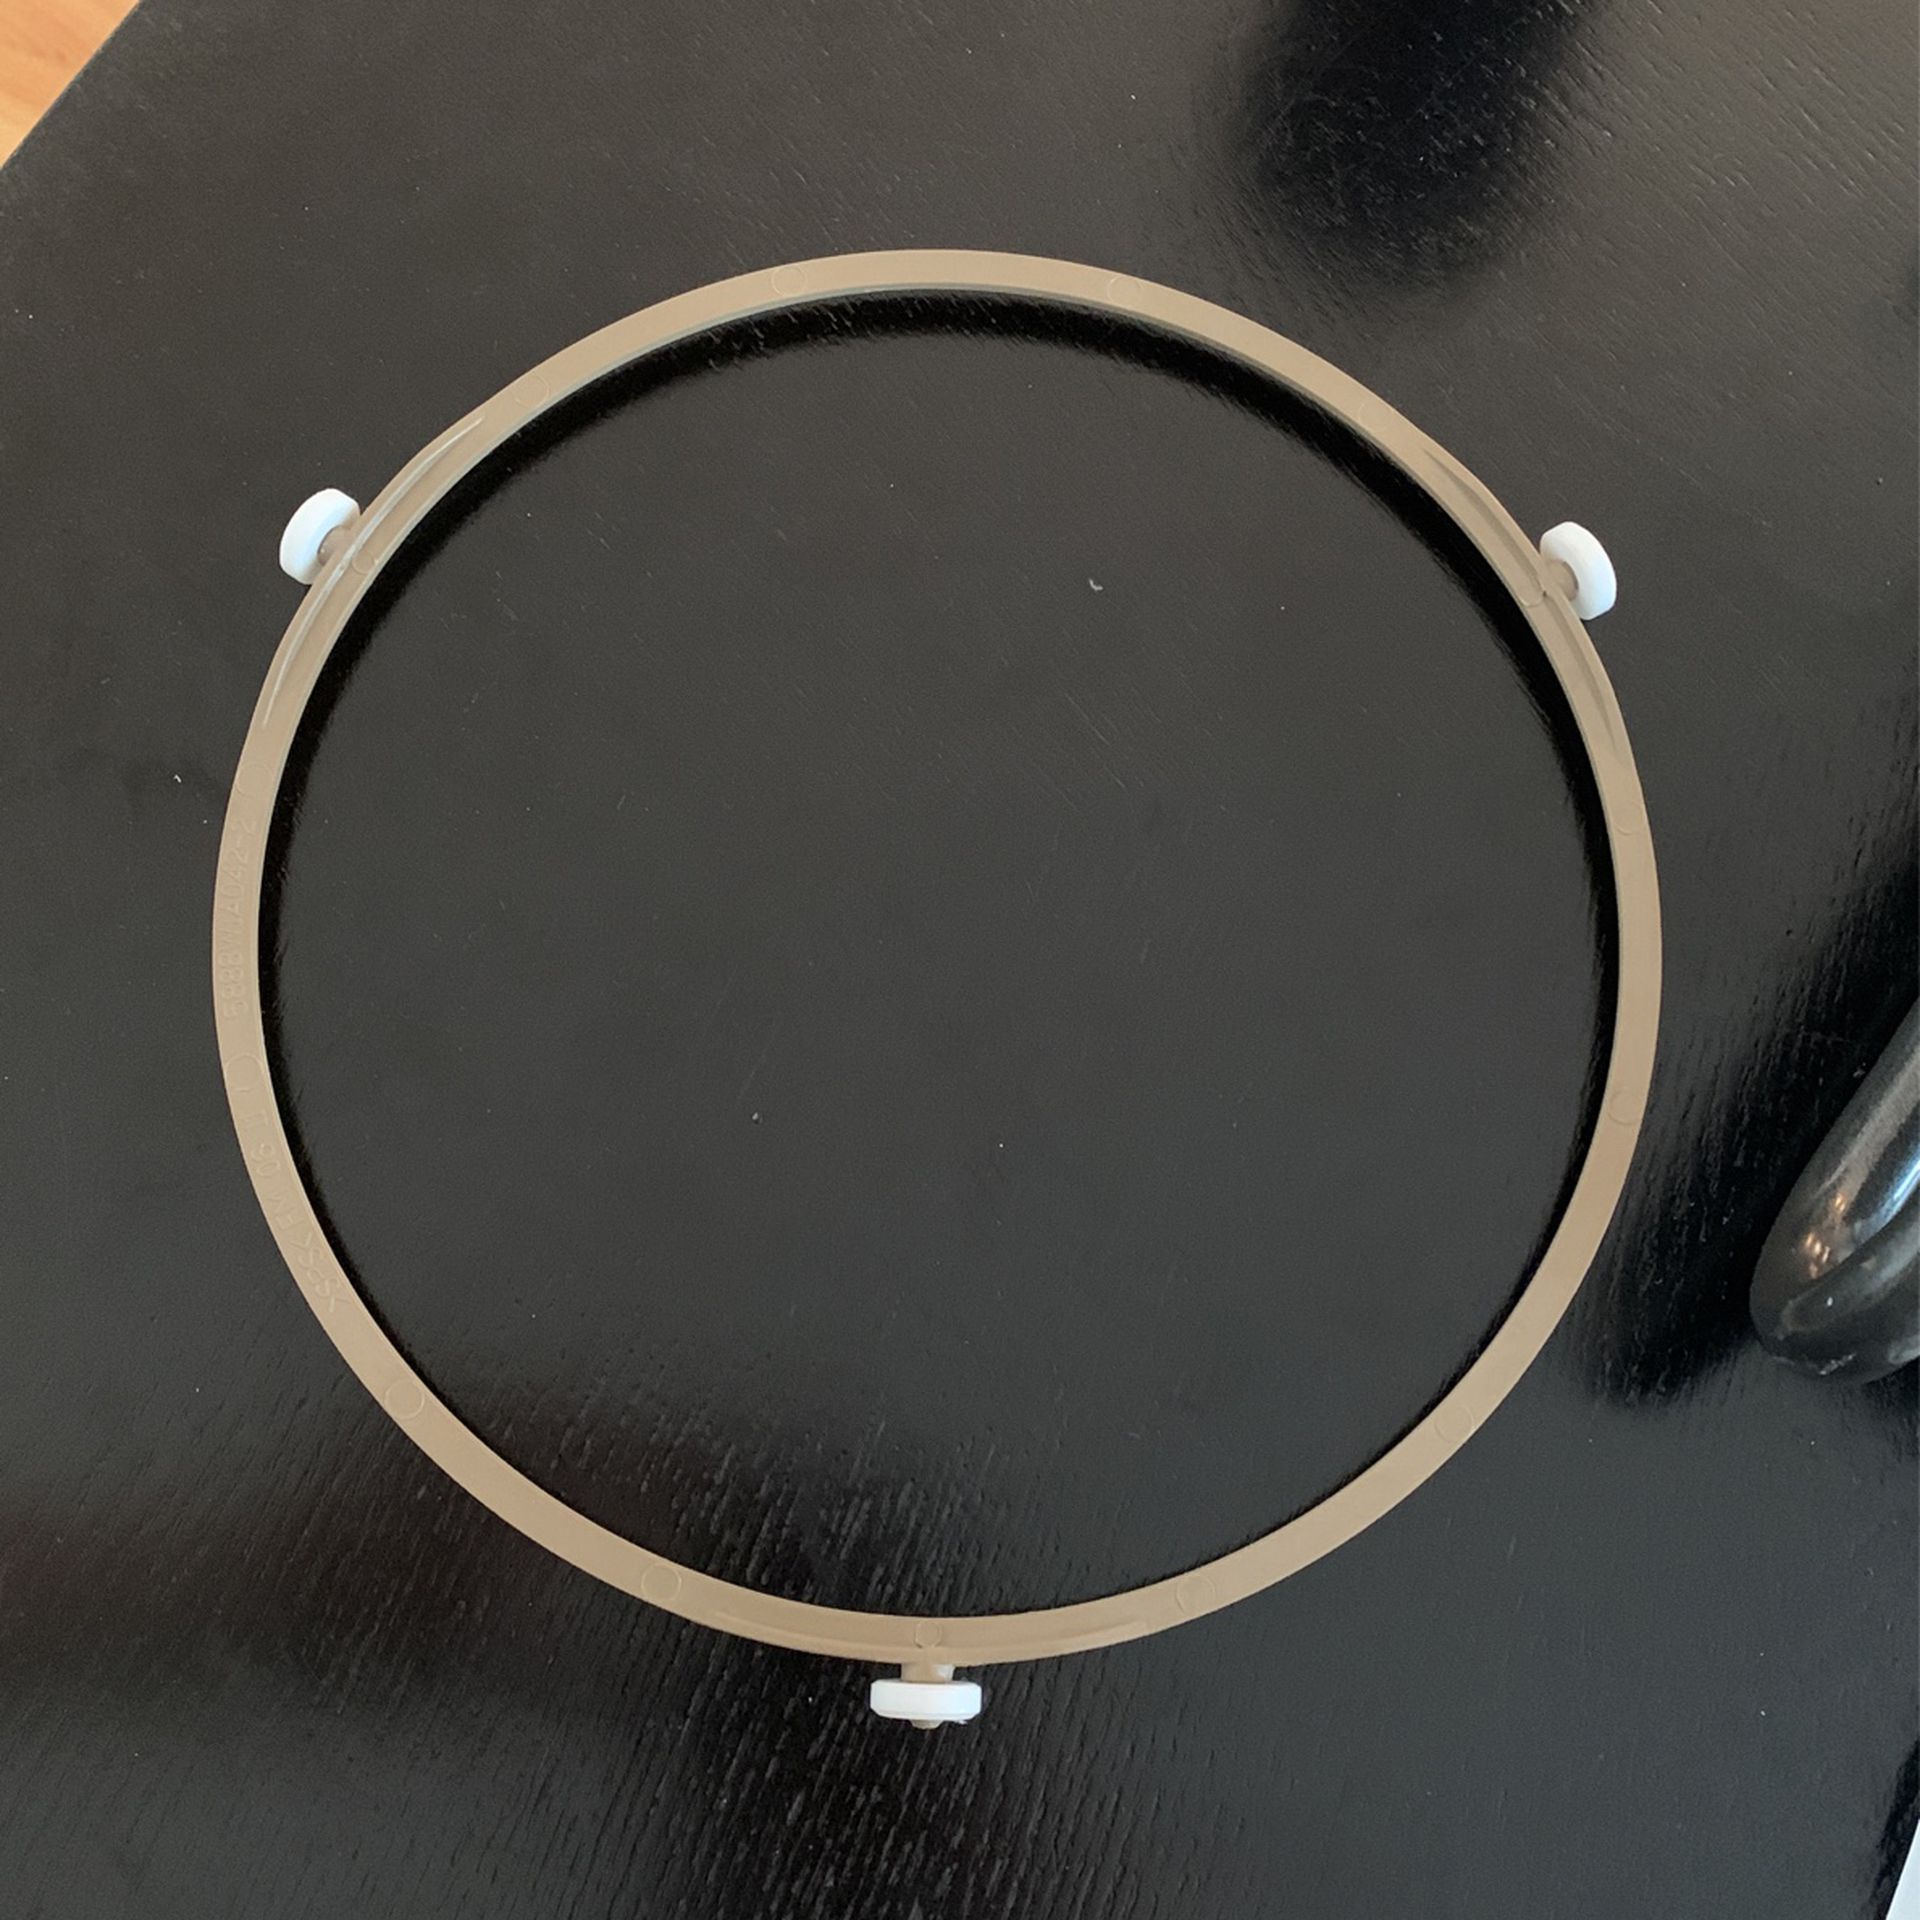 Microwave Part - Tray Ring - Perfect Condition 